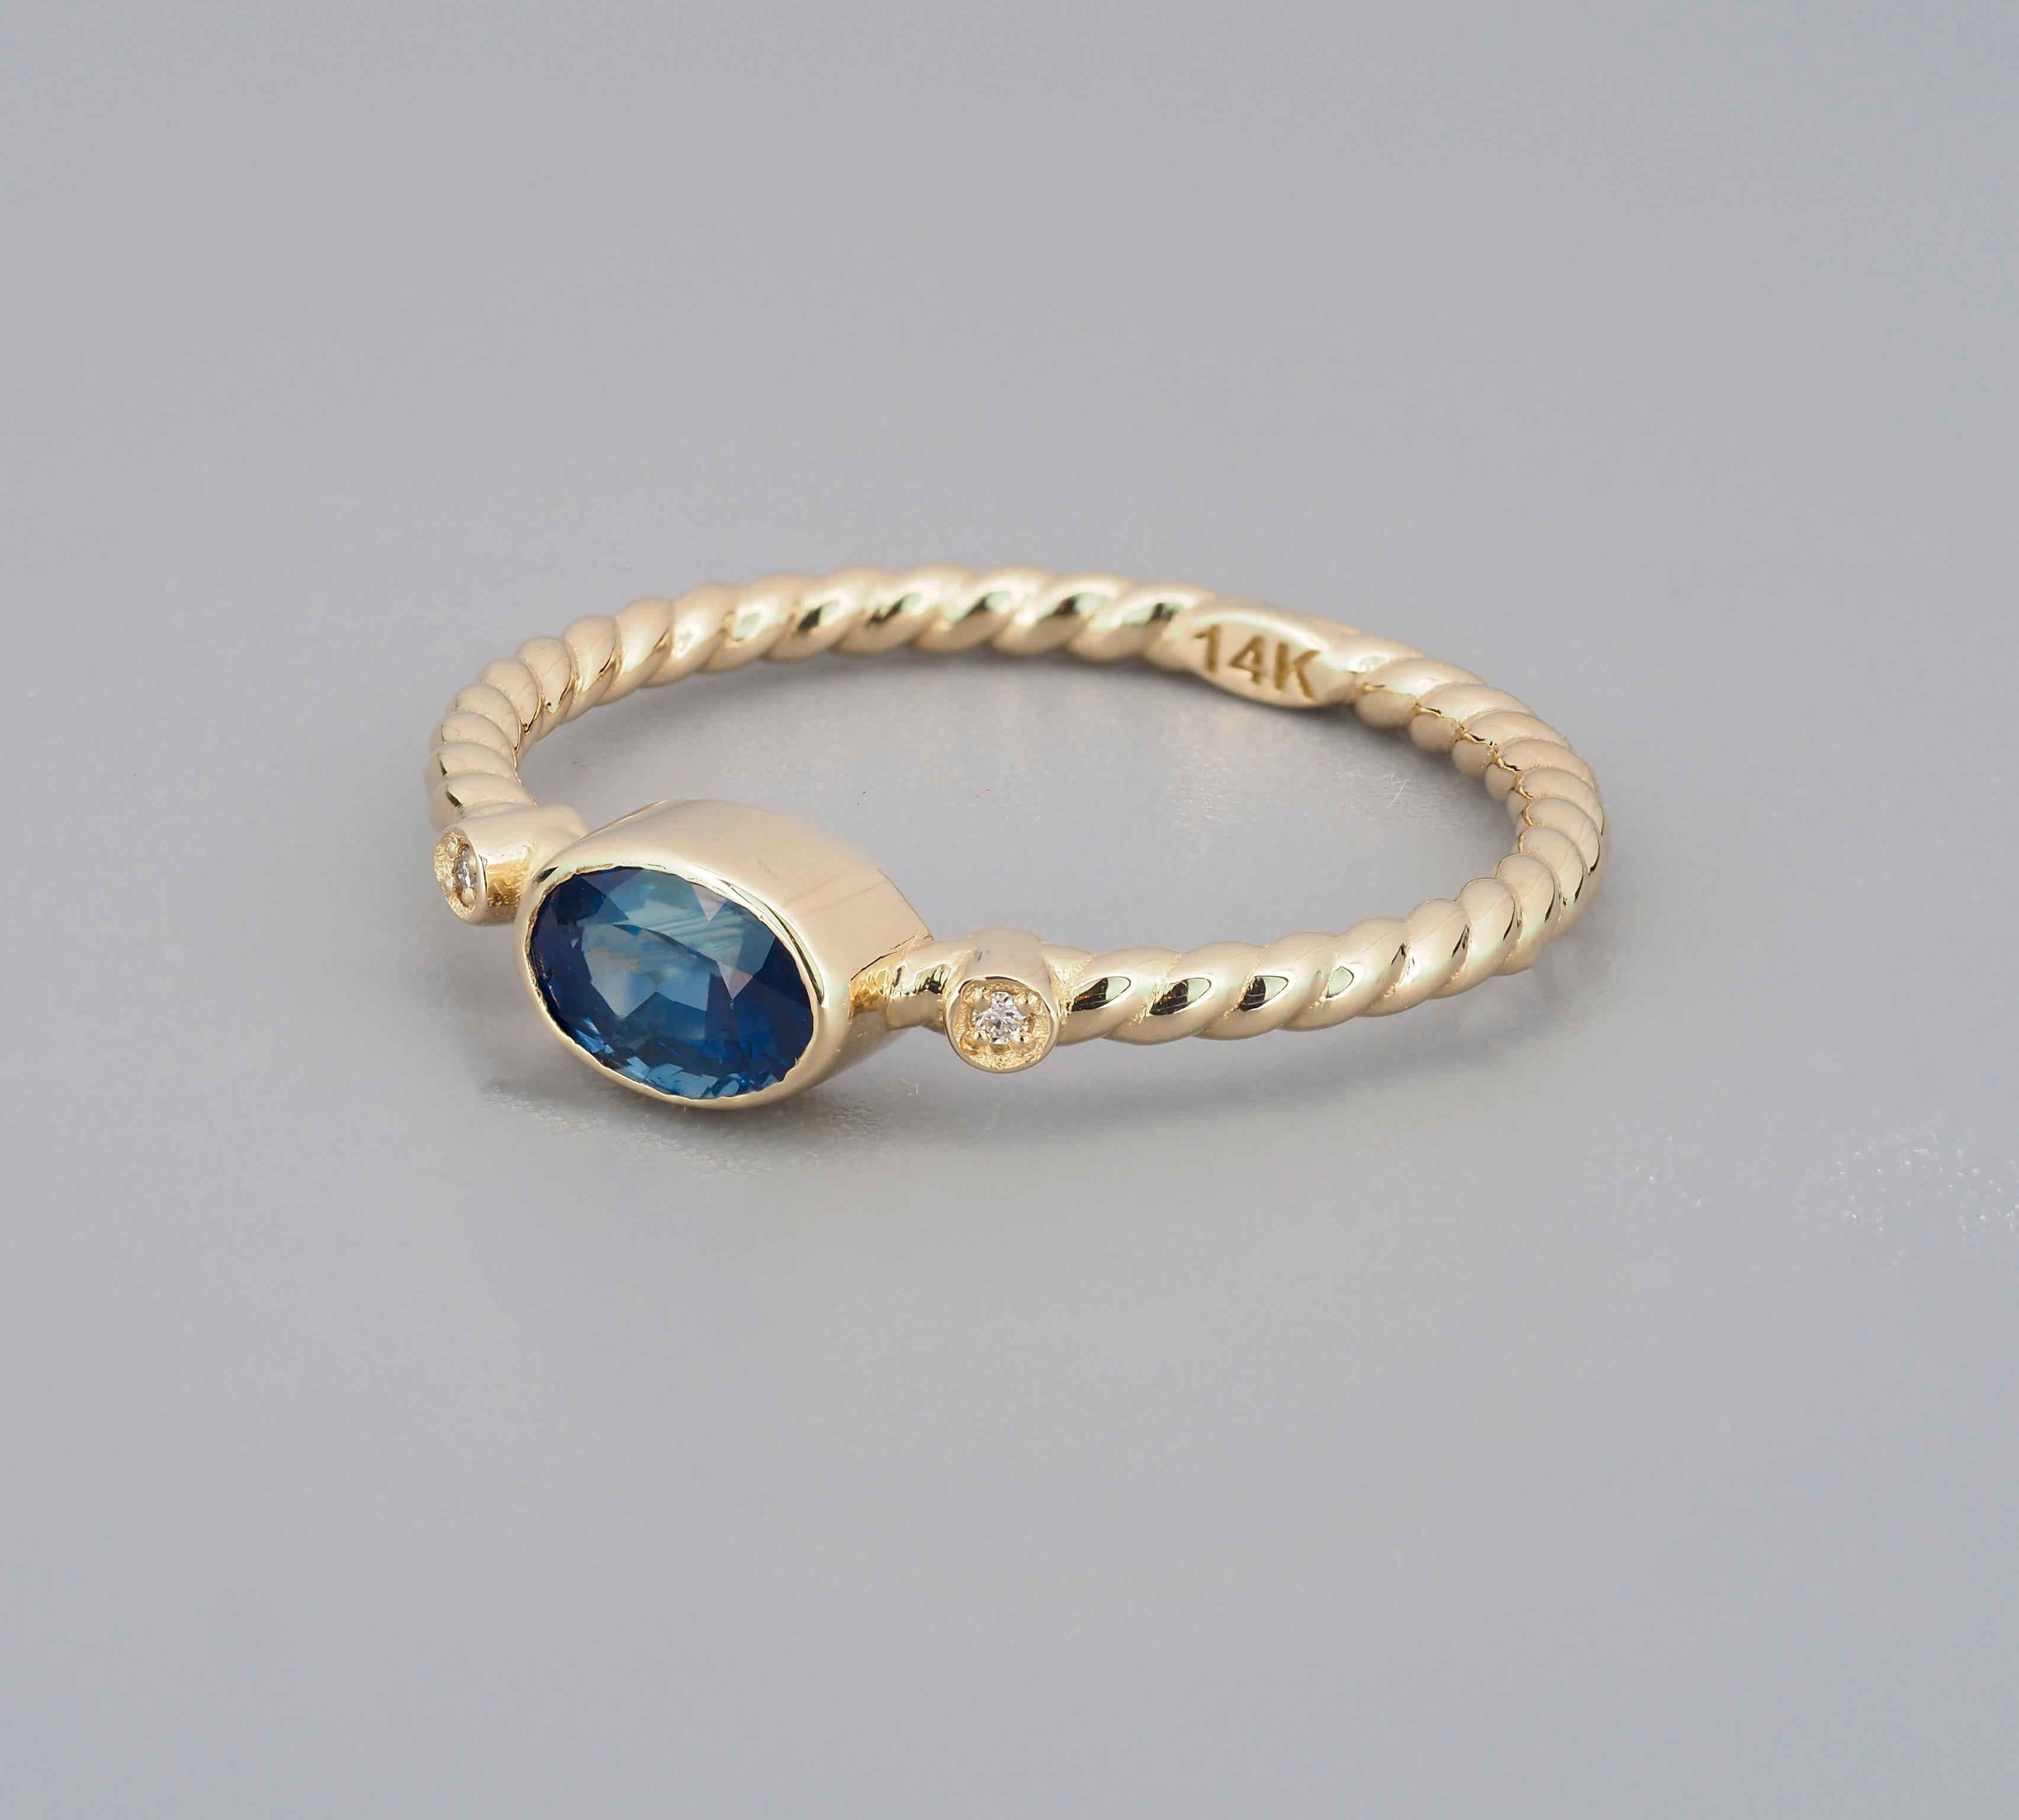 For Sale:  Blue sapphire ring in 14k gold.  3